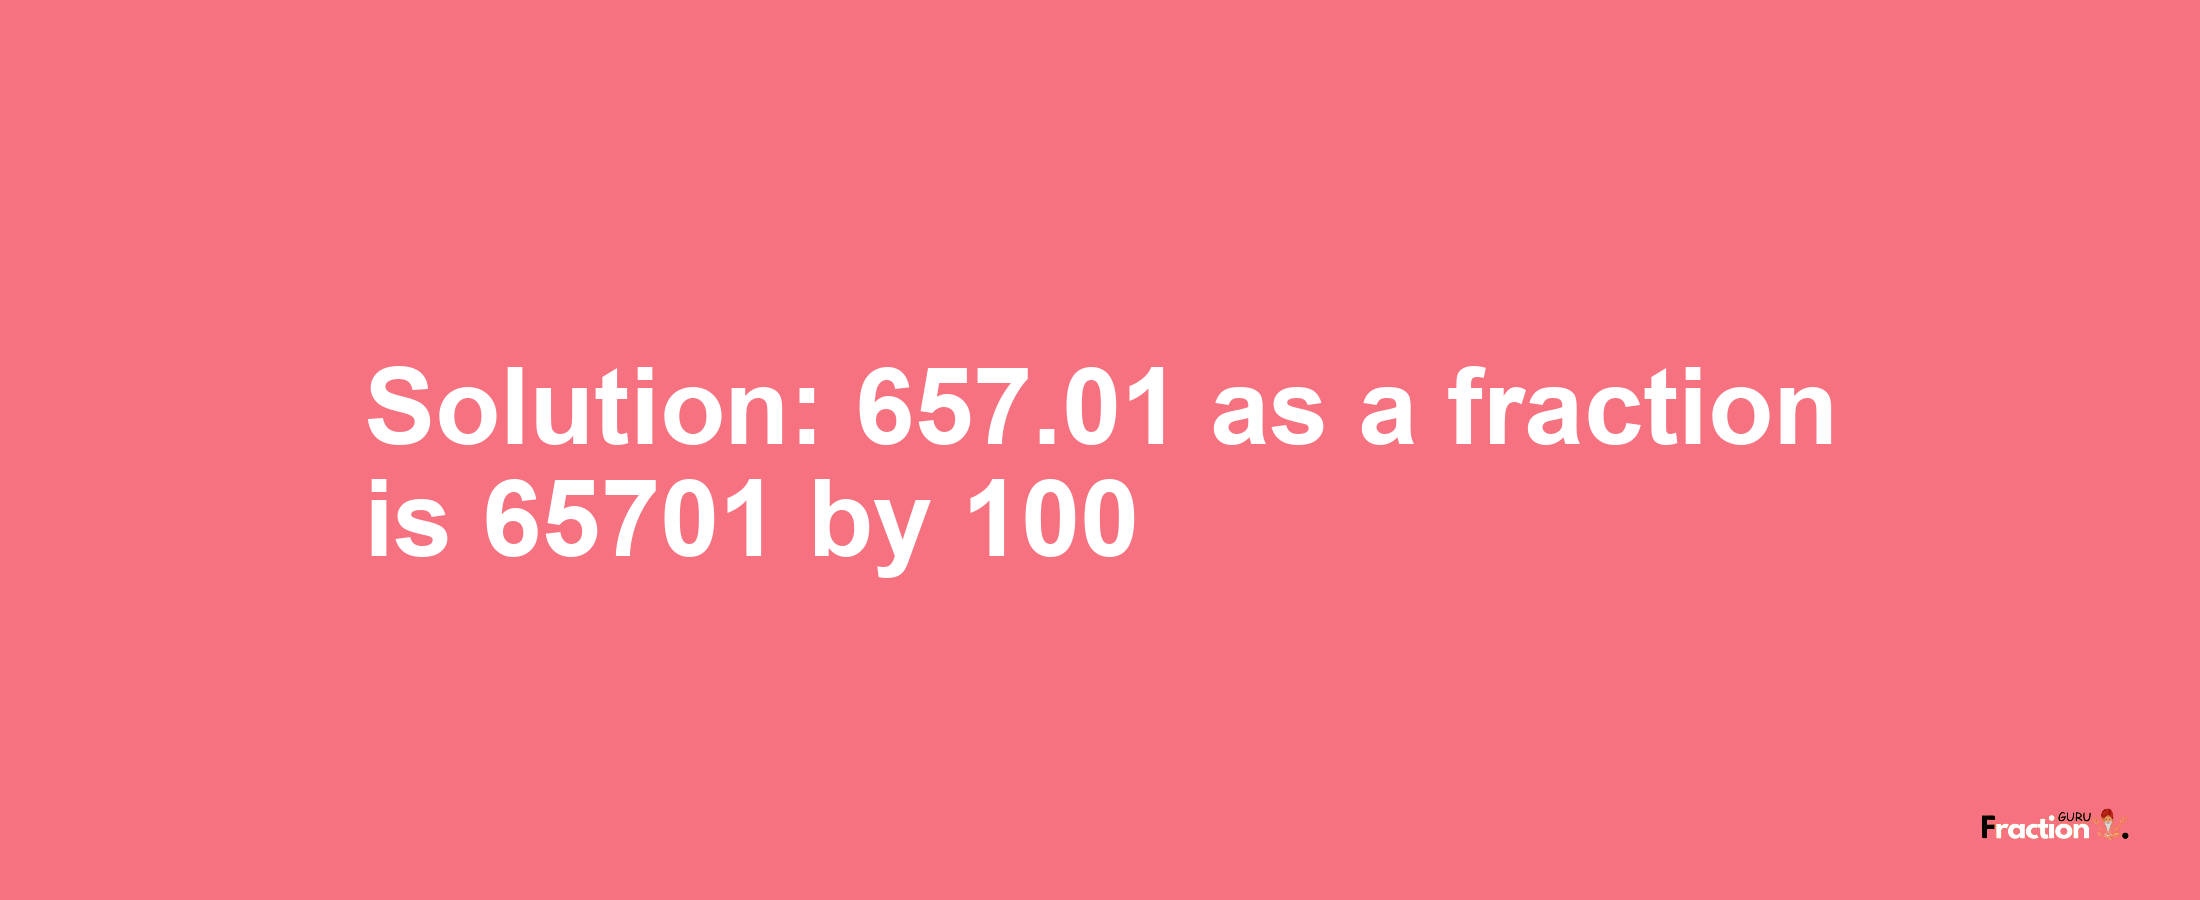 Solution:657.01 as a fraction is 65701/100